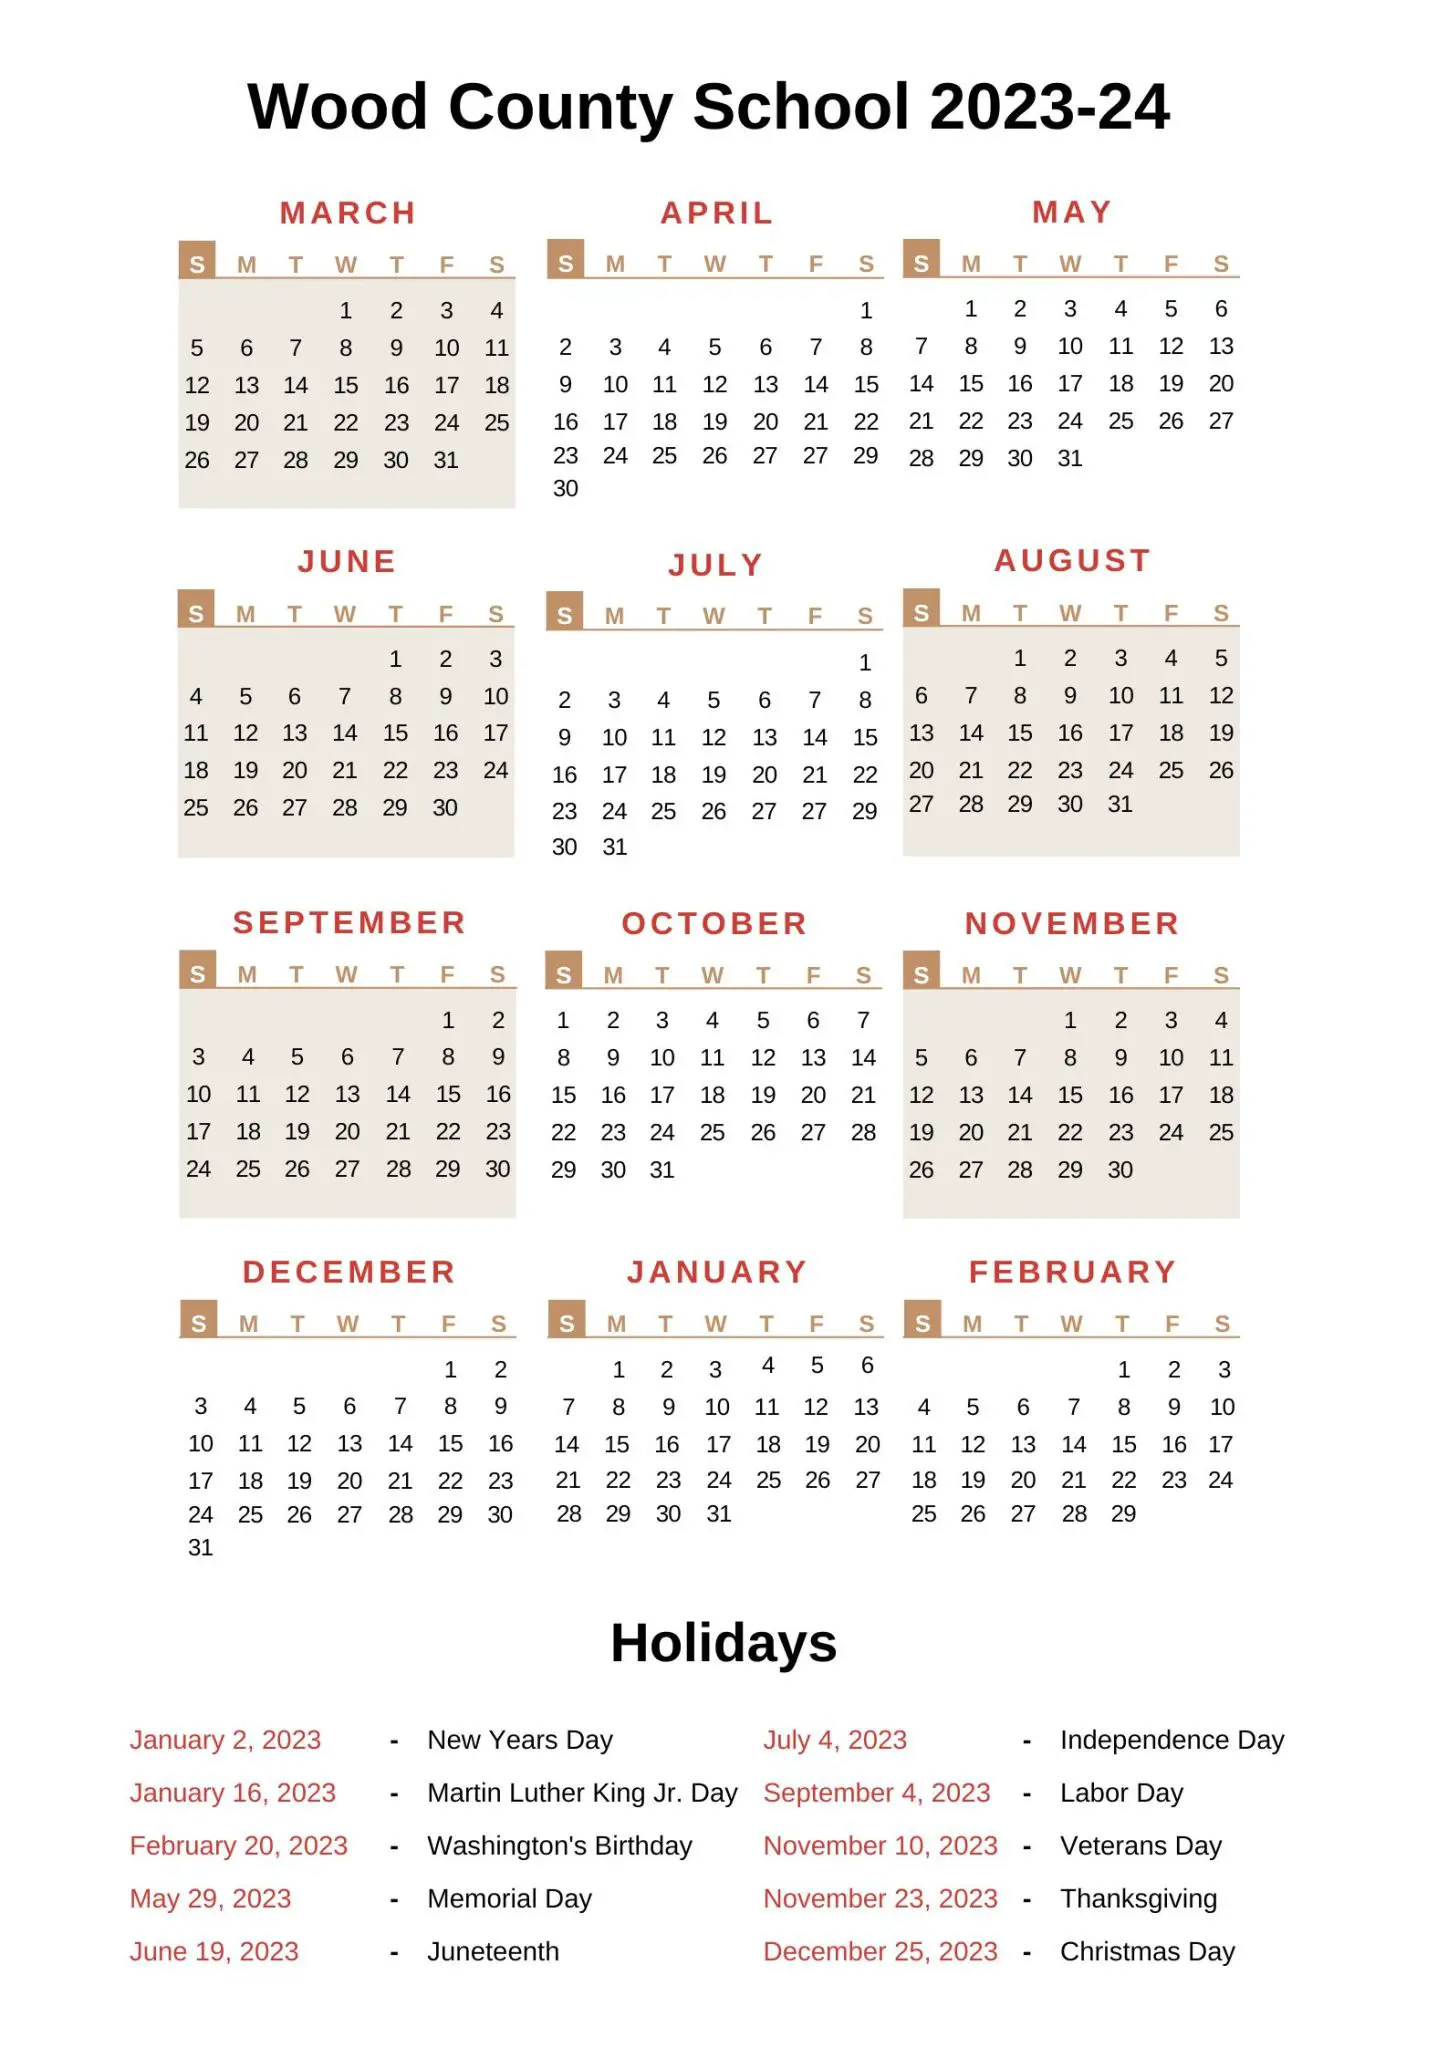 Wood County Schools Calendar 2023-24 With Holidays